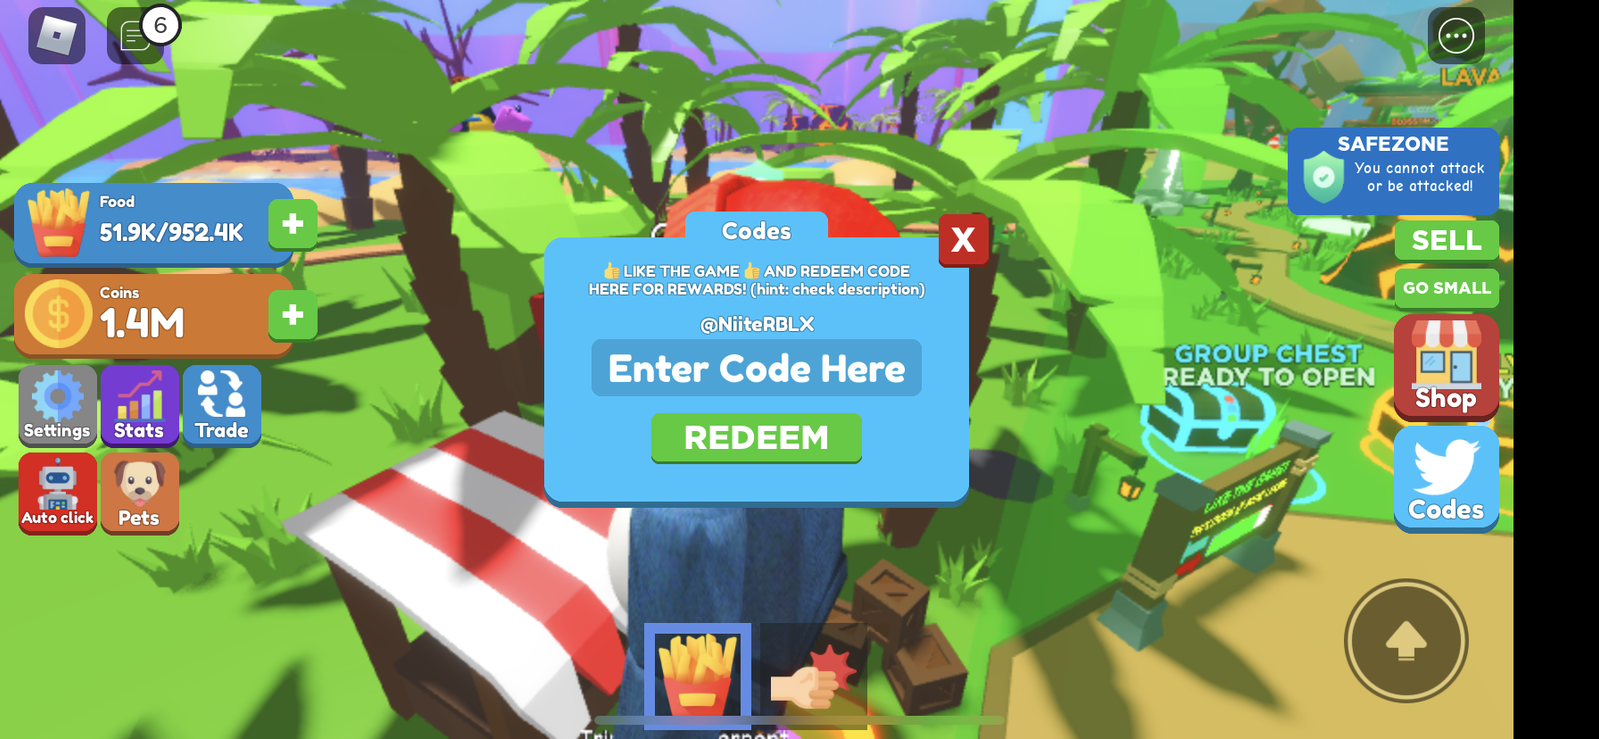 Eating Simulator codes redeem screen, with a green field covered by a text box